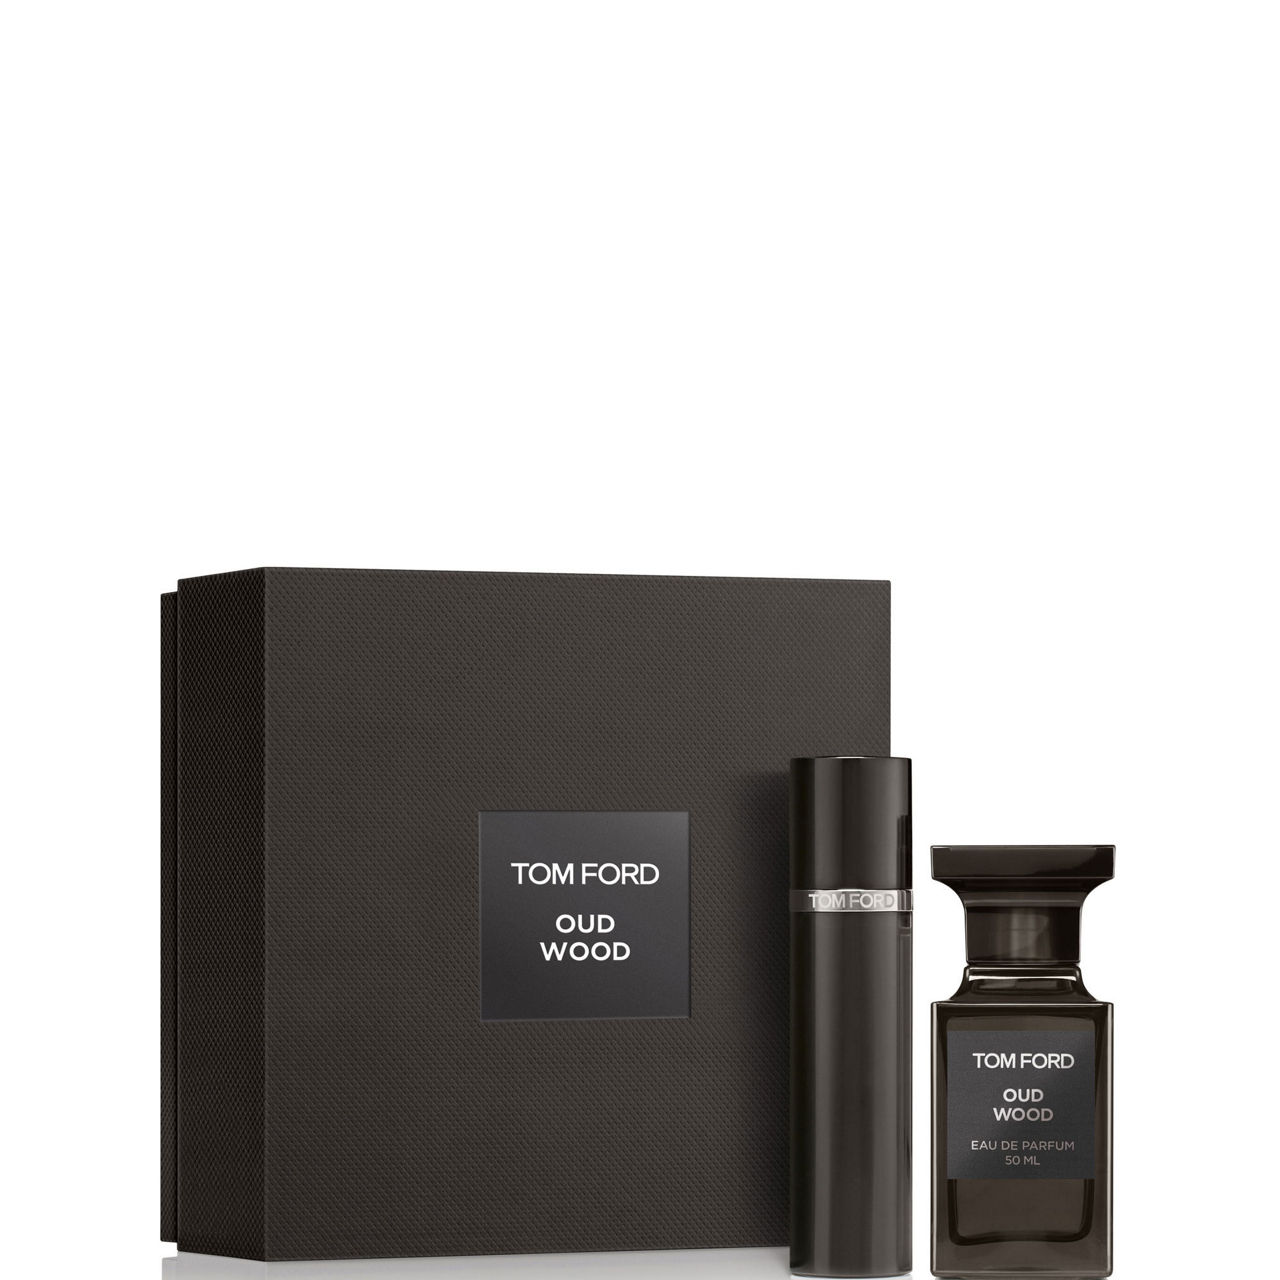 Tom Ford - Make up & Fragrance Specialist - Brown Thomas - 22.5